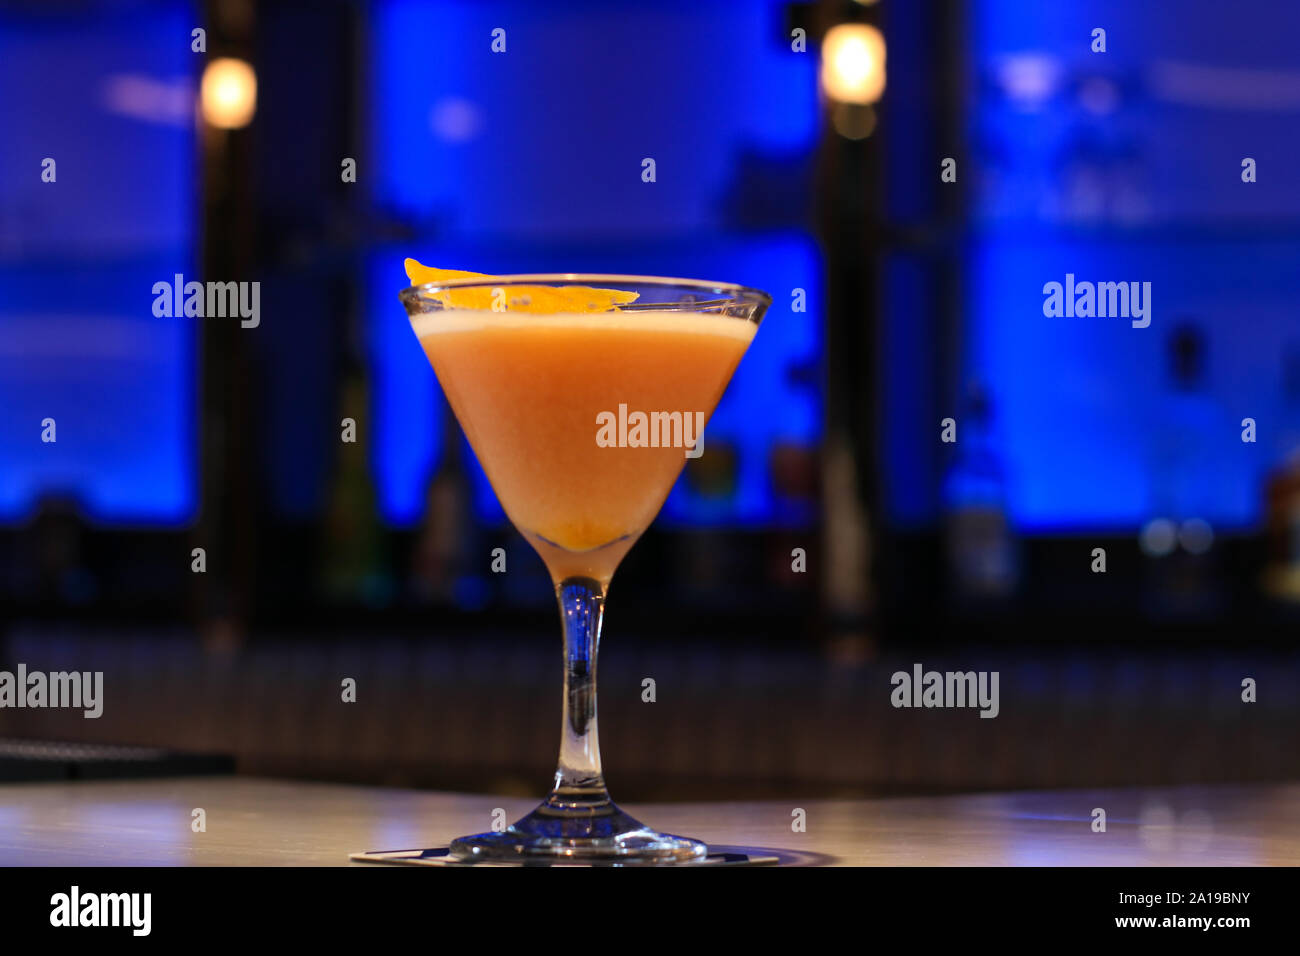 Alcoholic cocktail in a glass at a bar. Fruit cocktails decorated. Stock Photo